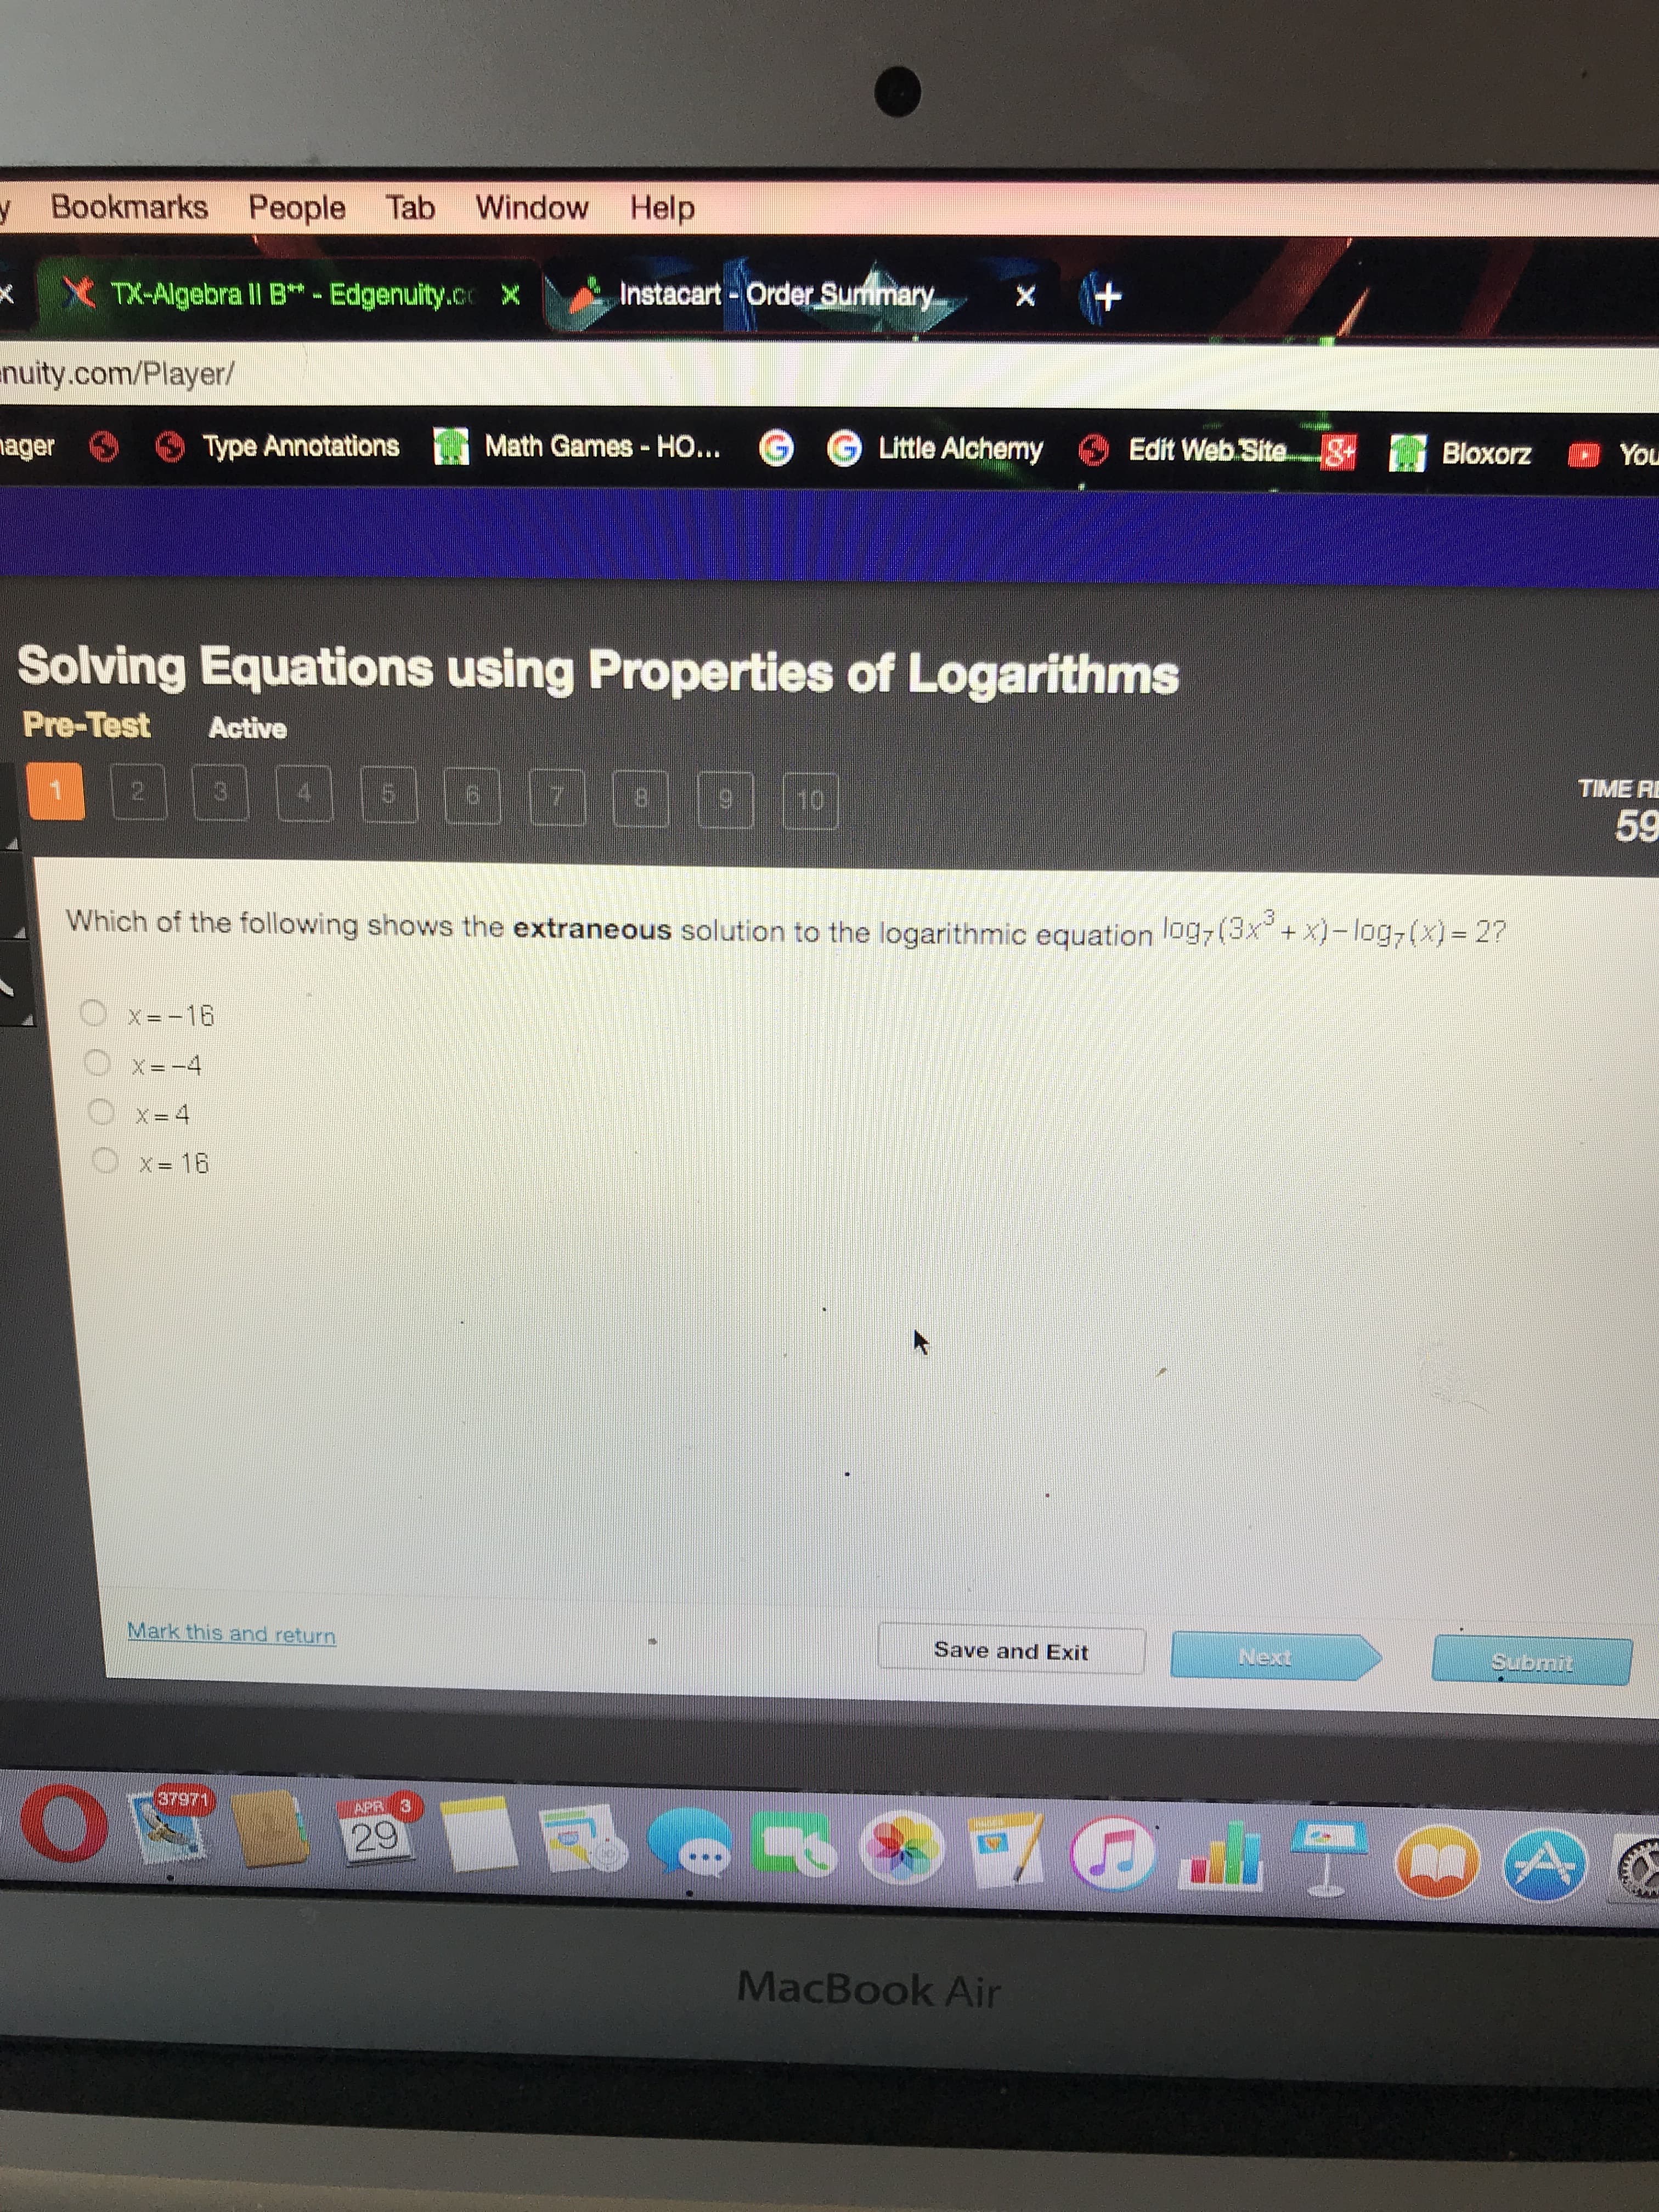 y Bookmarks People Tab
Window Help
xX TX-Algebra lI B*- Edgenuity.c x
Instacart-Order Surmimary
nuity.com/Player/
nager
Type Annotations
Math Games - HO... G
G Little Alchemy
Edit Web Site.-8+ Bloxorz
You
Solving Equations using Properties of Logarithms
Pre-Test
Active
4.
7.
8.
10
TIME RI
59
Which of the following shows the extraneous solution to the logarithmic equation log7(3x + x)- log,(x) = 2?
X= -16
X= -4
X= 16
Mark this and return
Save and Exit
Next
Submit
37971
APR 3
29
MacBook Air
